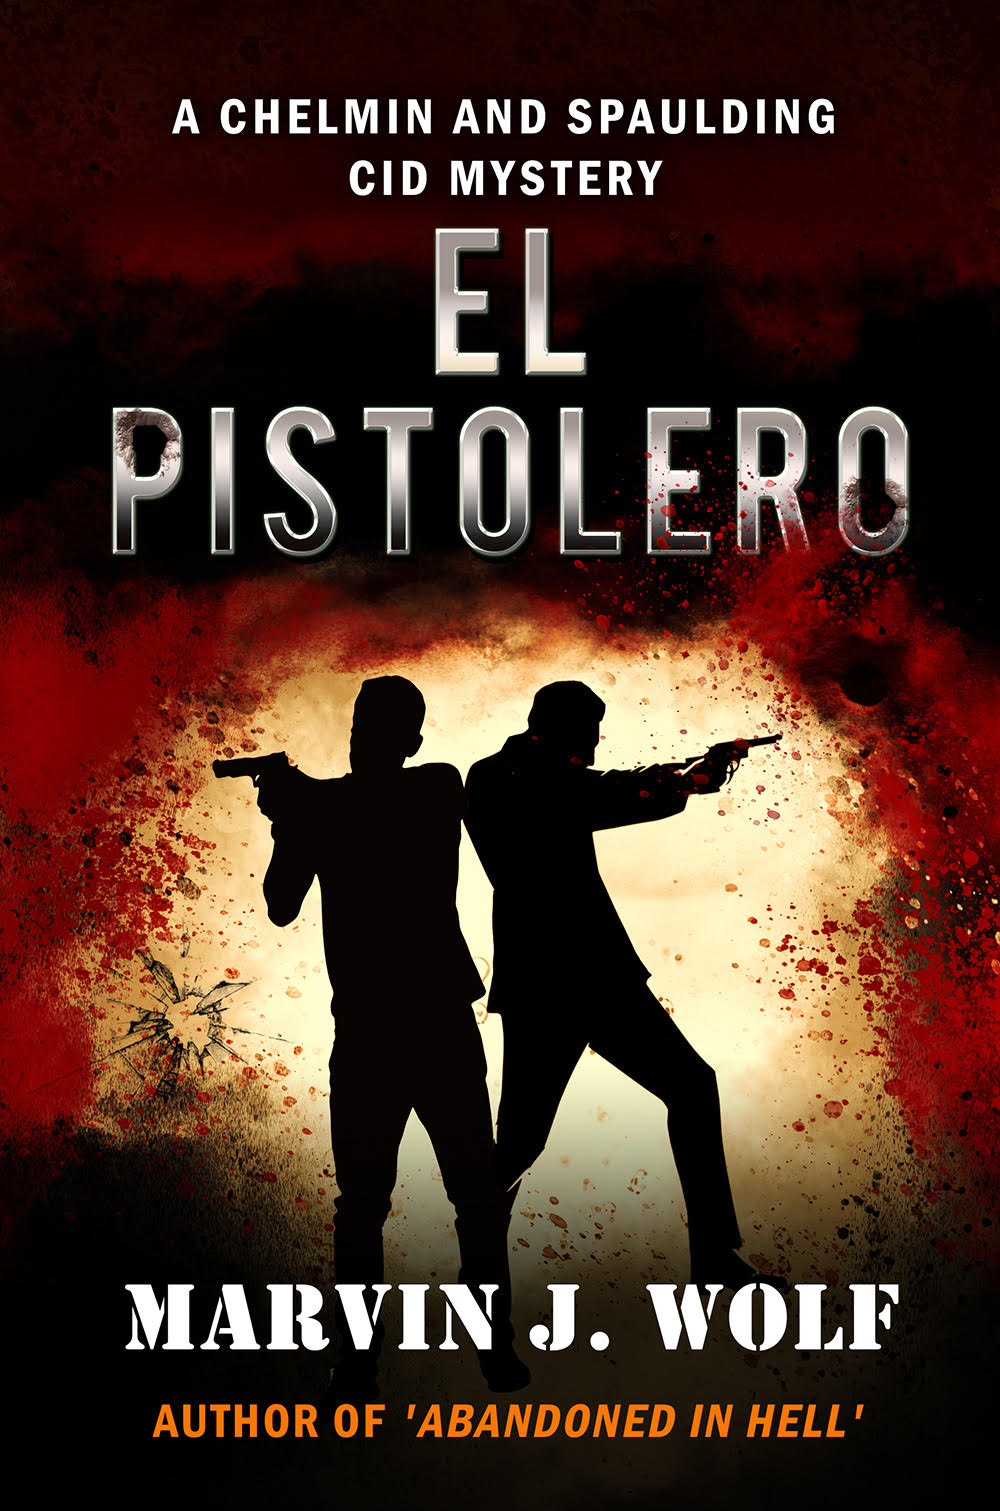 'El Pistolero,' A Chelmin and Spaulding CID Mystery,' by Marvin J. Wolf